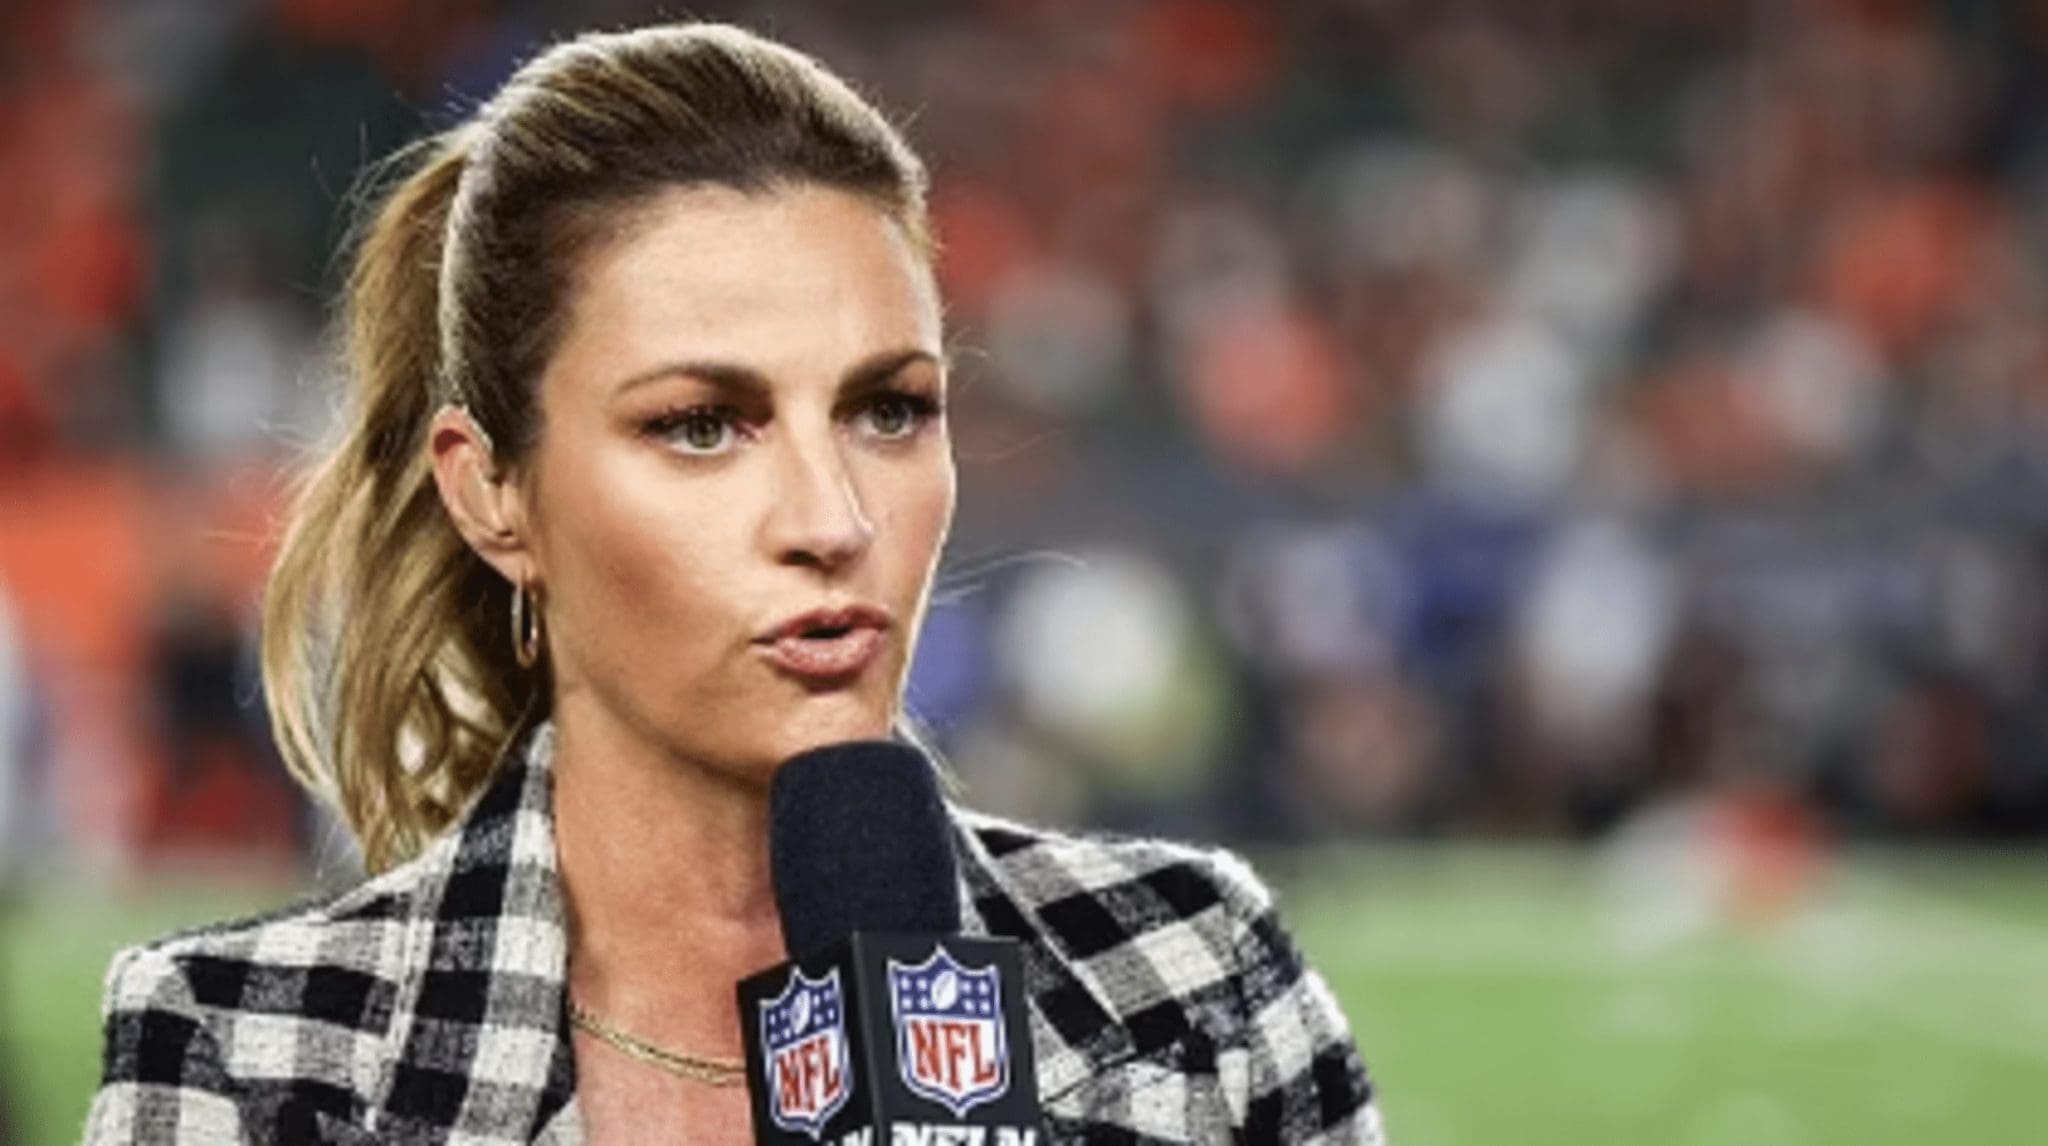 Erin Andrews Claims That Her Driver Dozed Off On The Highway